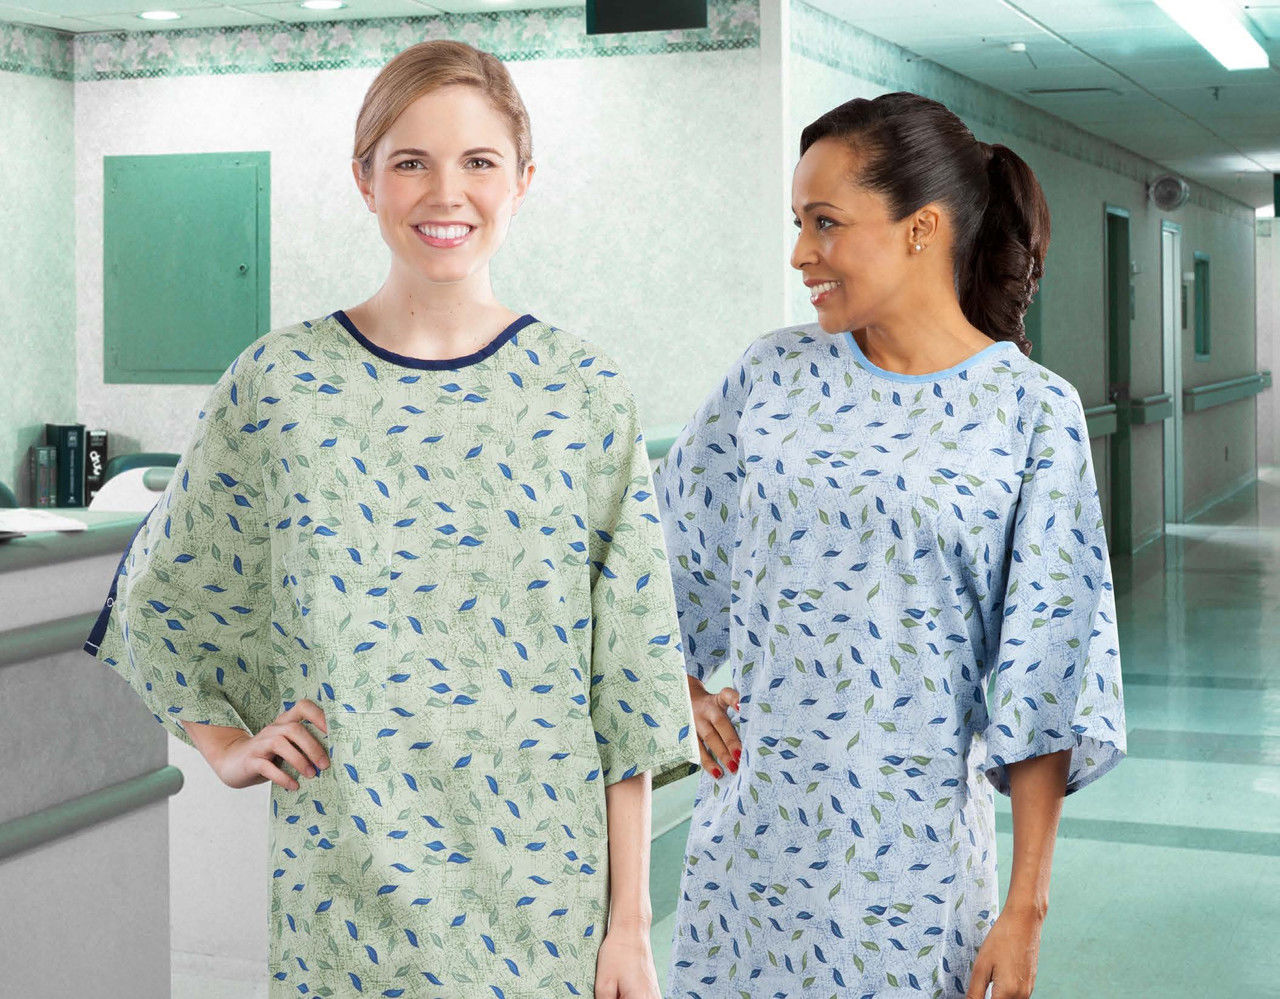 What are isolation gowns made of?